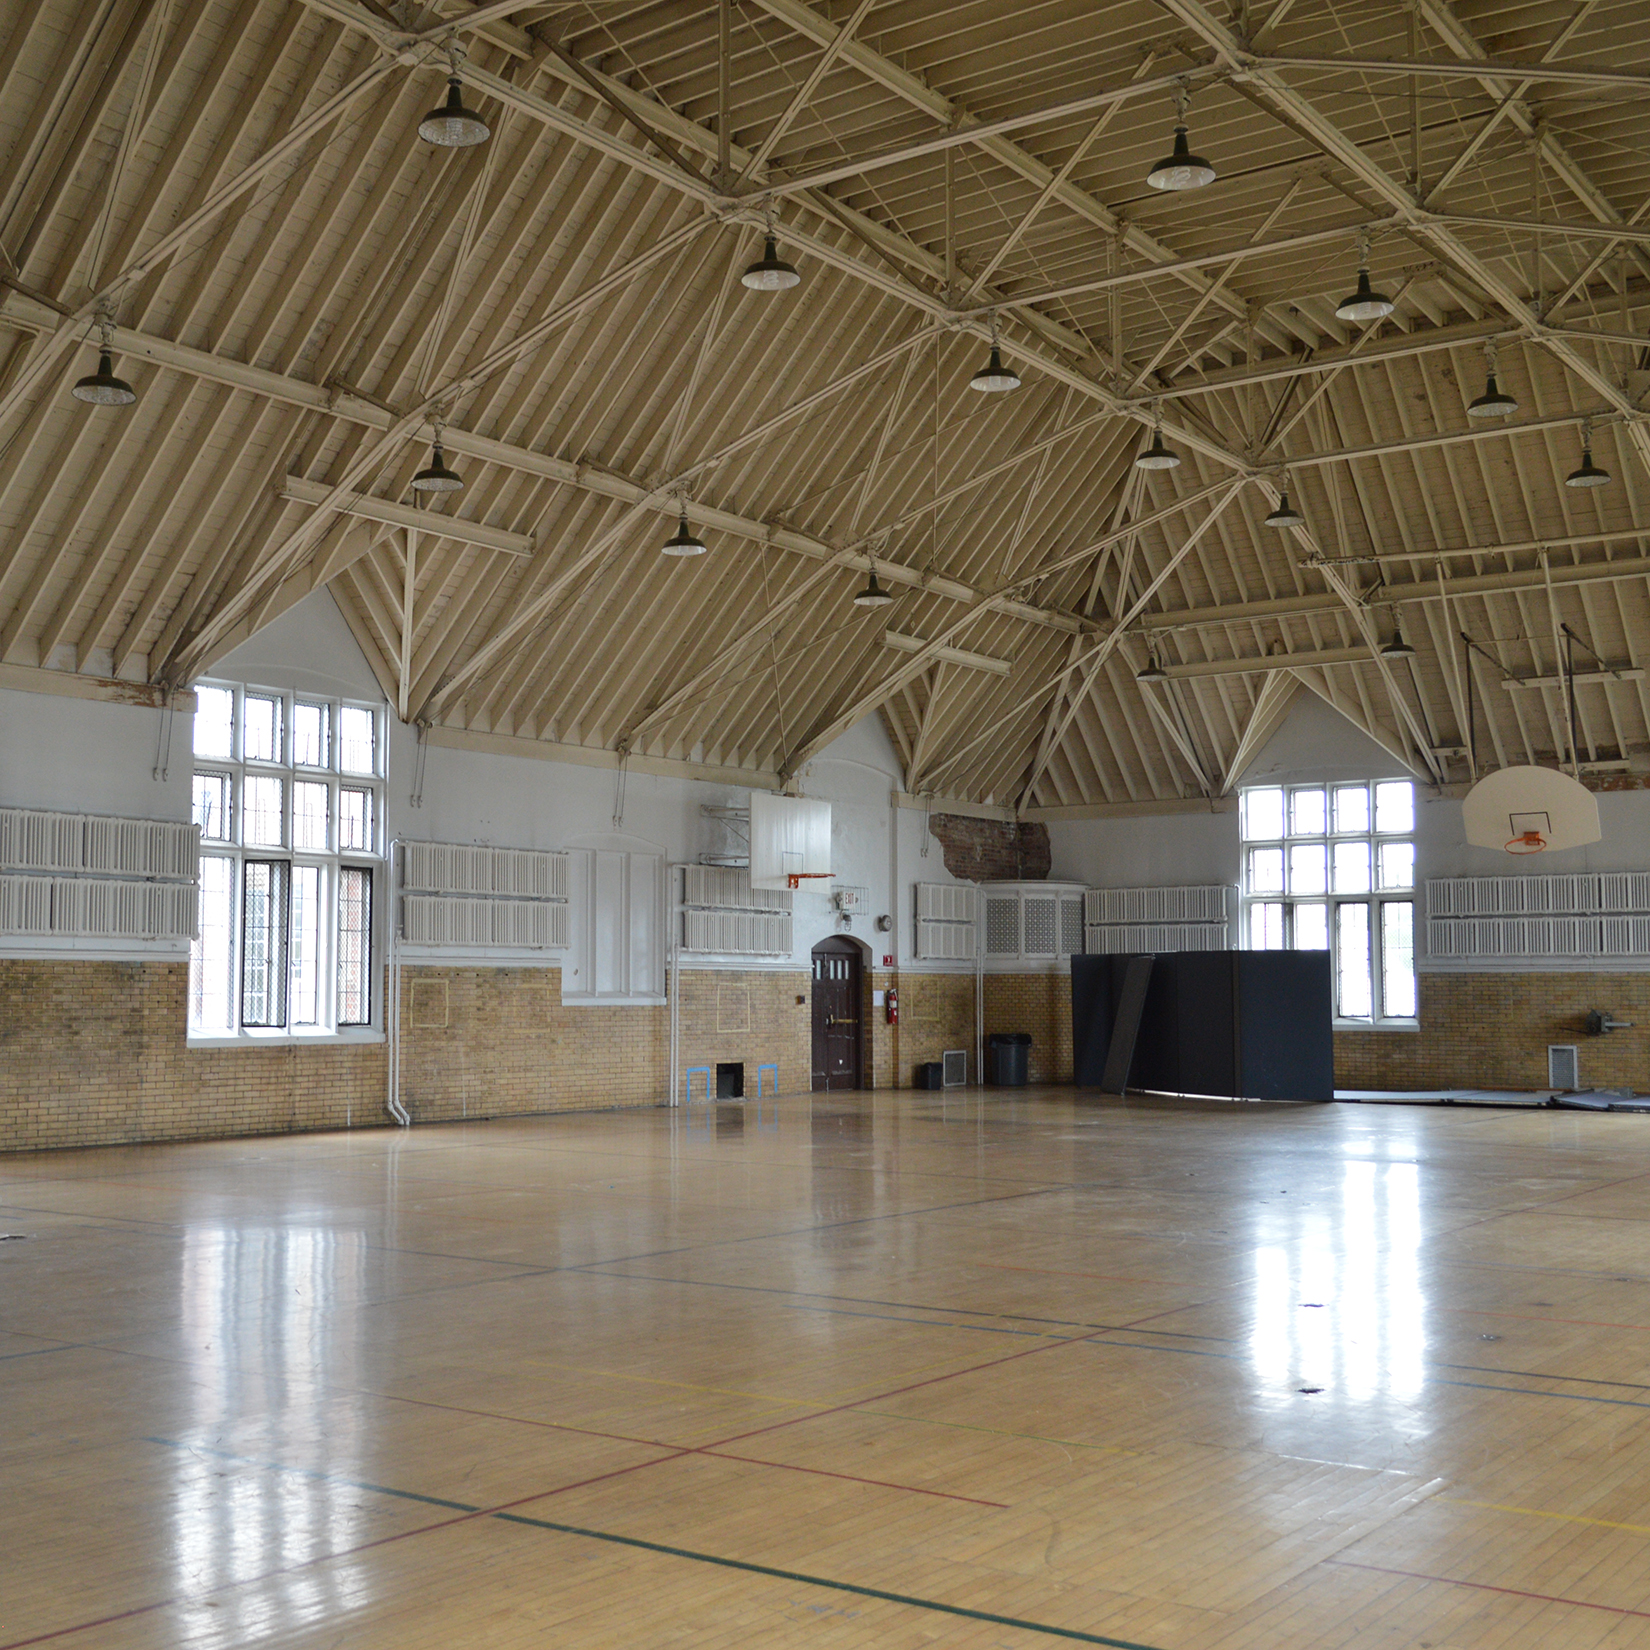 Photo of the Pomerene gym (ideation zone) prior to renovation